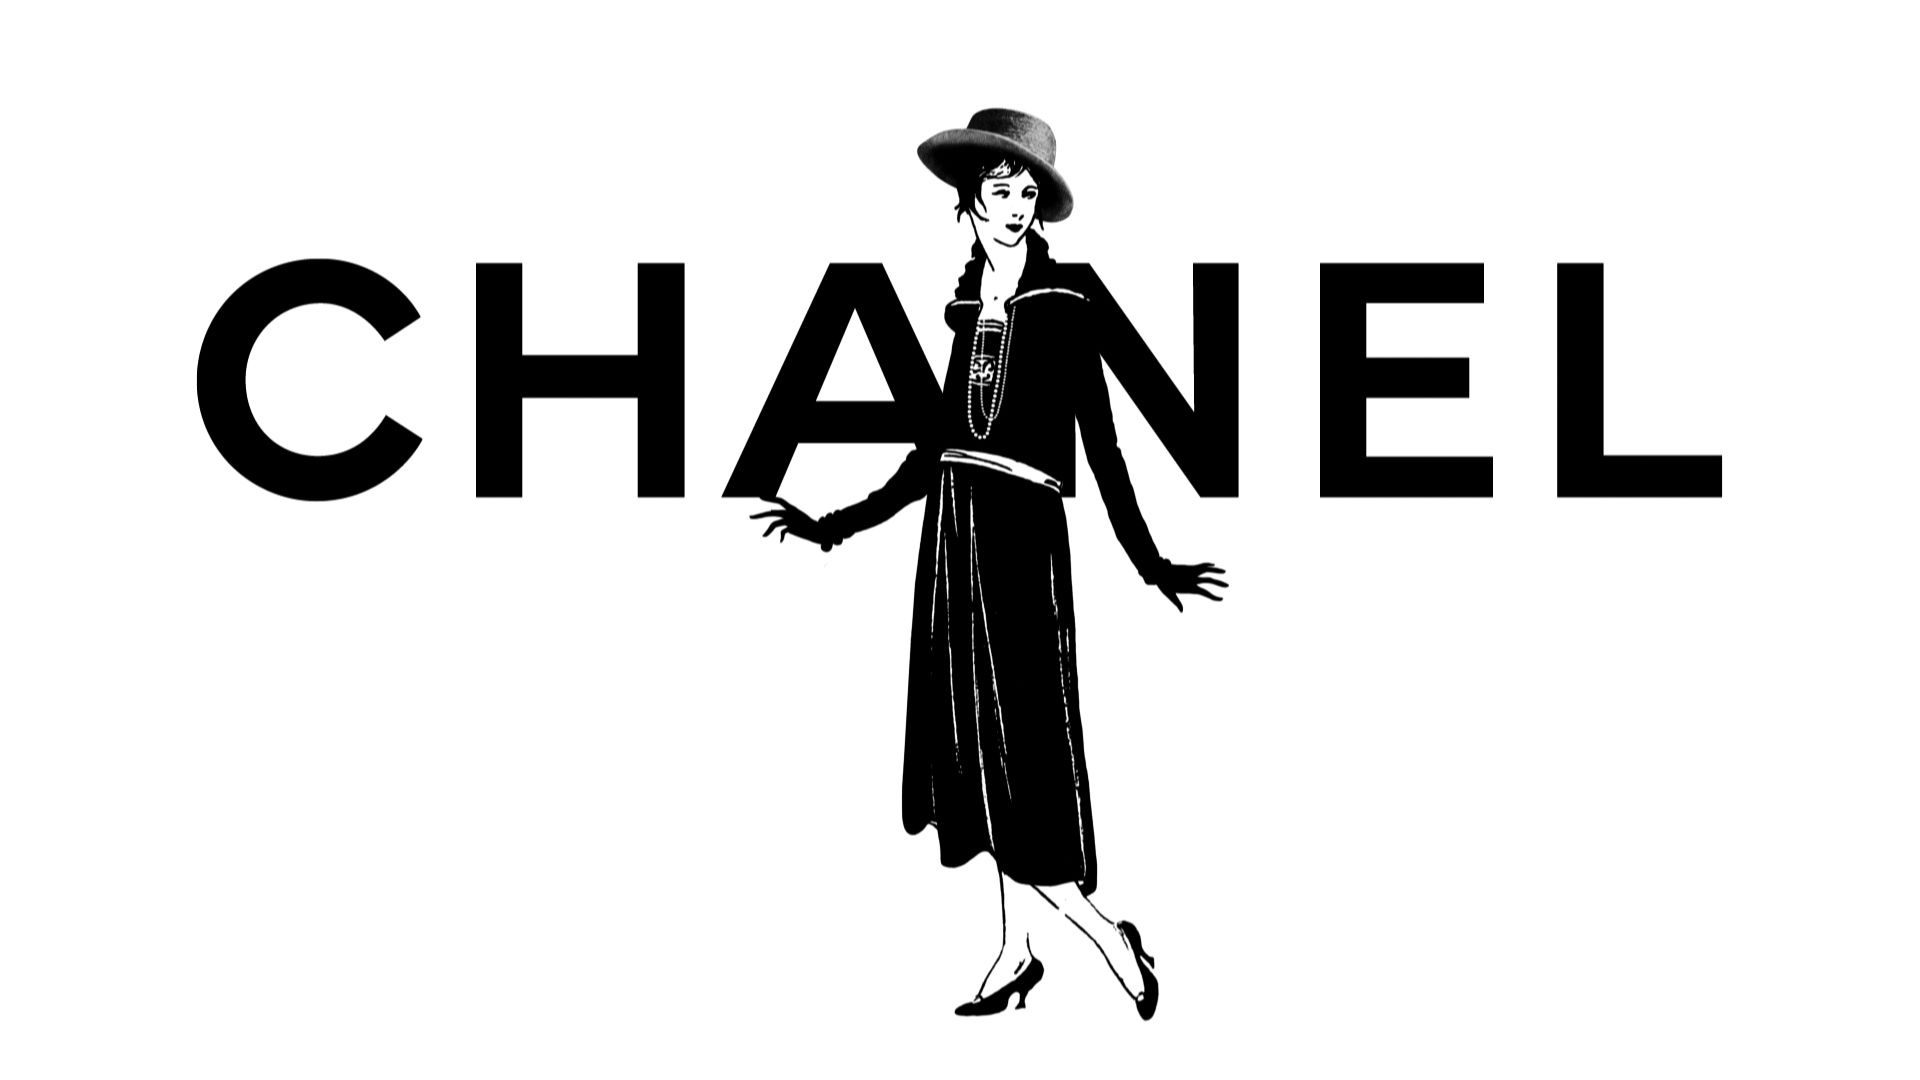 Best Coco Chanel computer wallpapers, Cool wallpapers, High-quality, Desktop, 1920x1080 Full HD Desktop